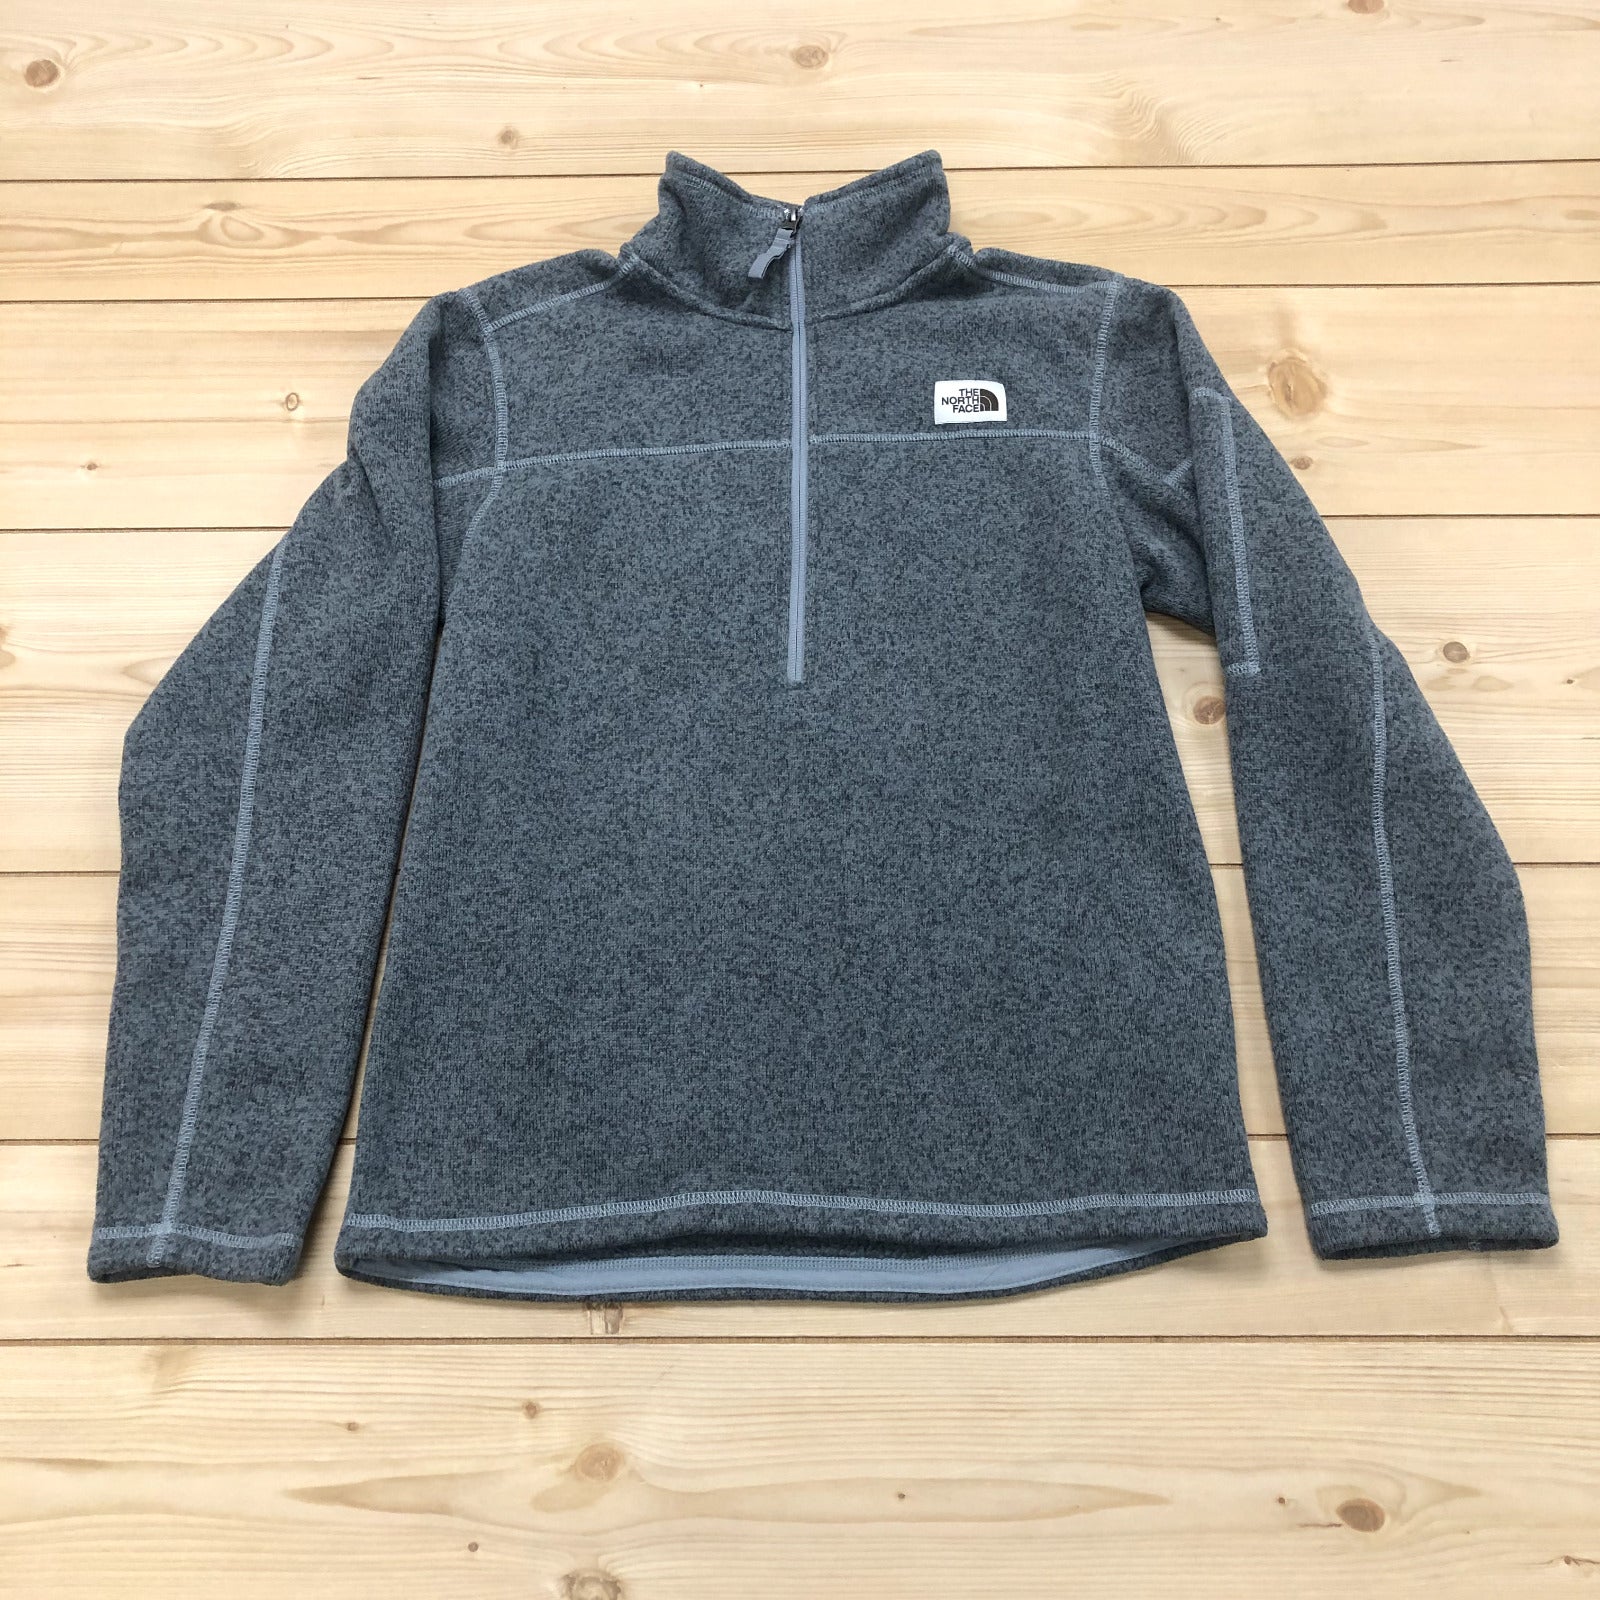 North Face Grey Mock Neck Long Sleeve 1/4 Zip Pullover Jacket Mens Size Small